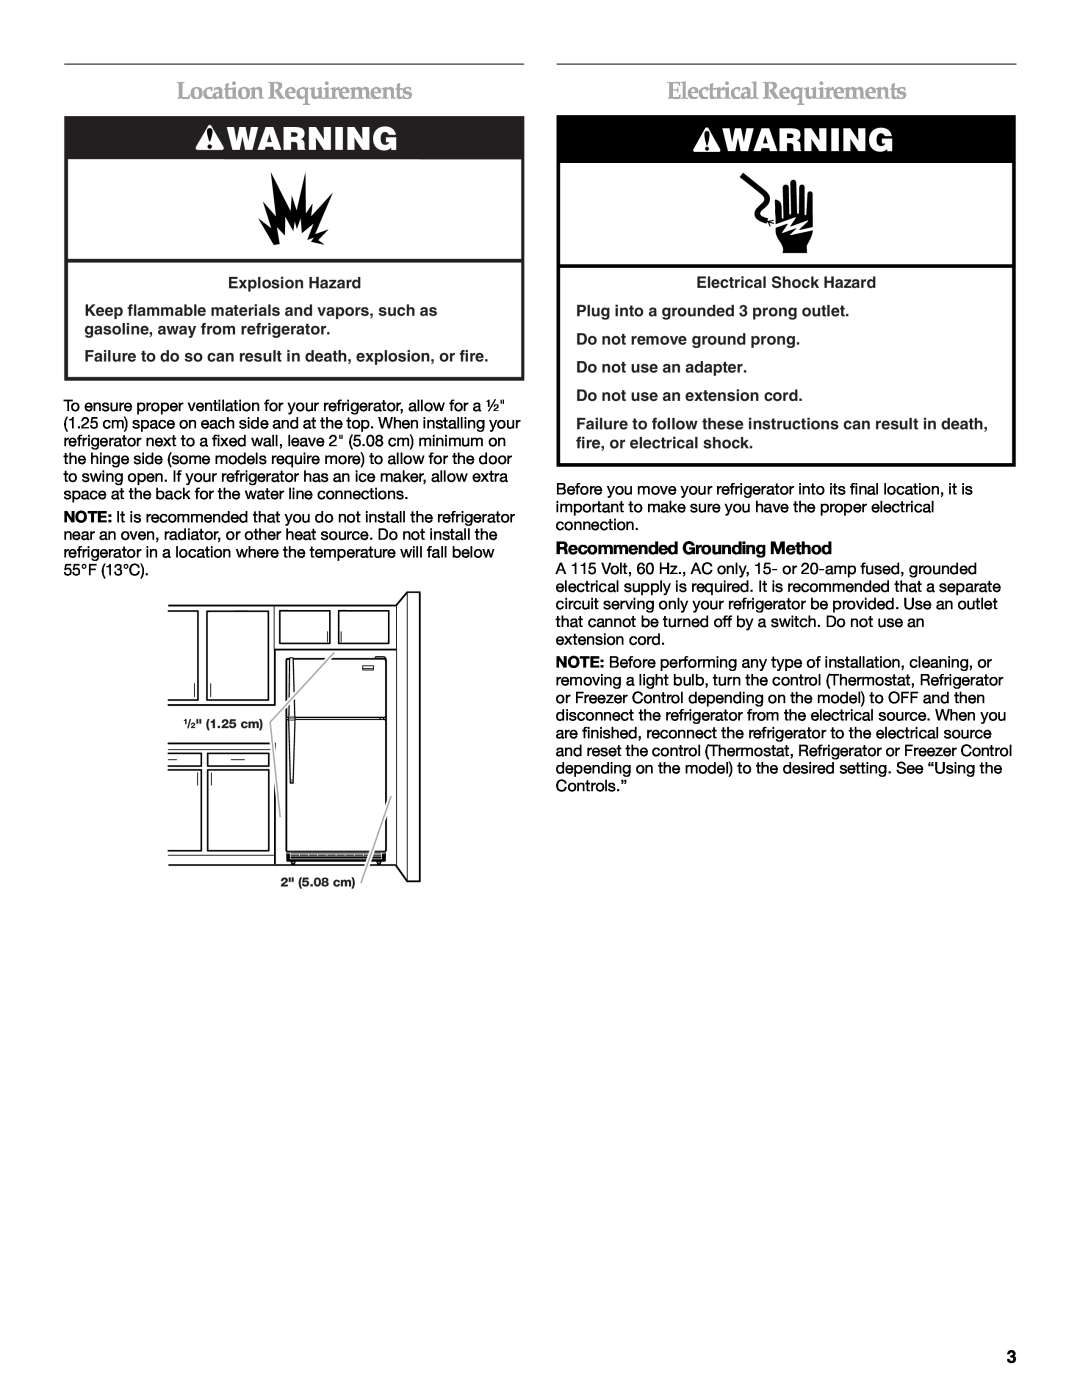 Maytag W10249207A Location Requirements, Electrical Requirements, Recommended Grounding Method, Explosion Hazard 